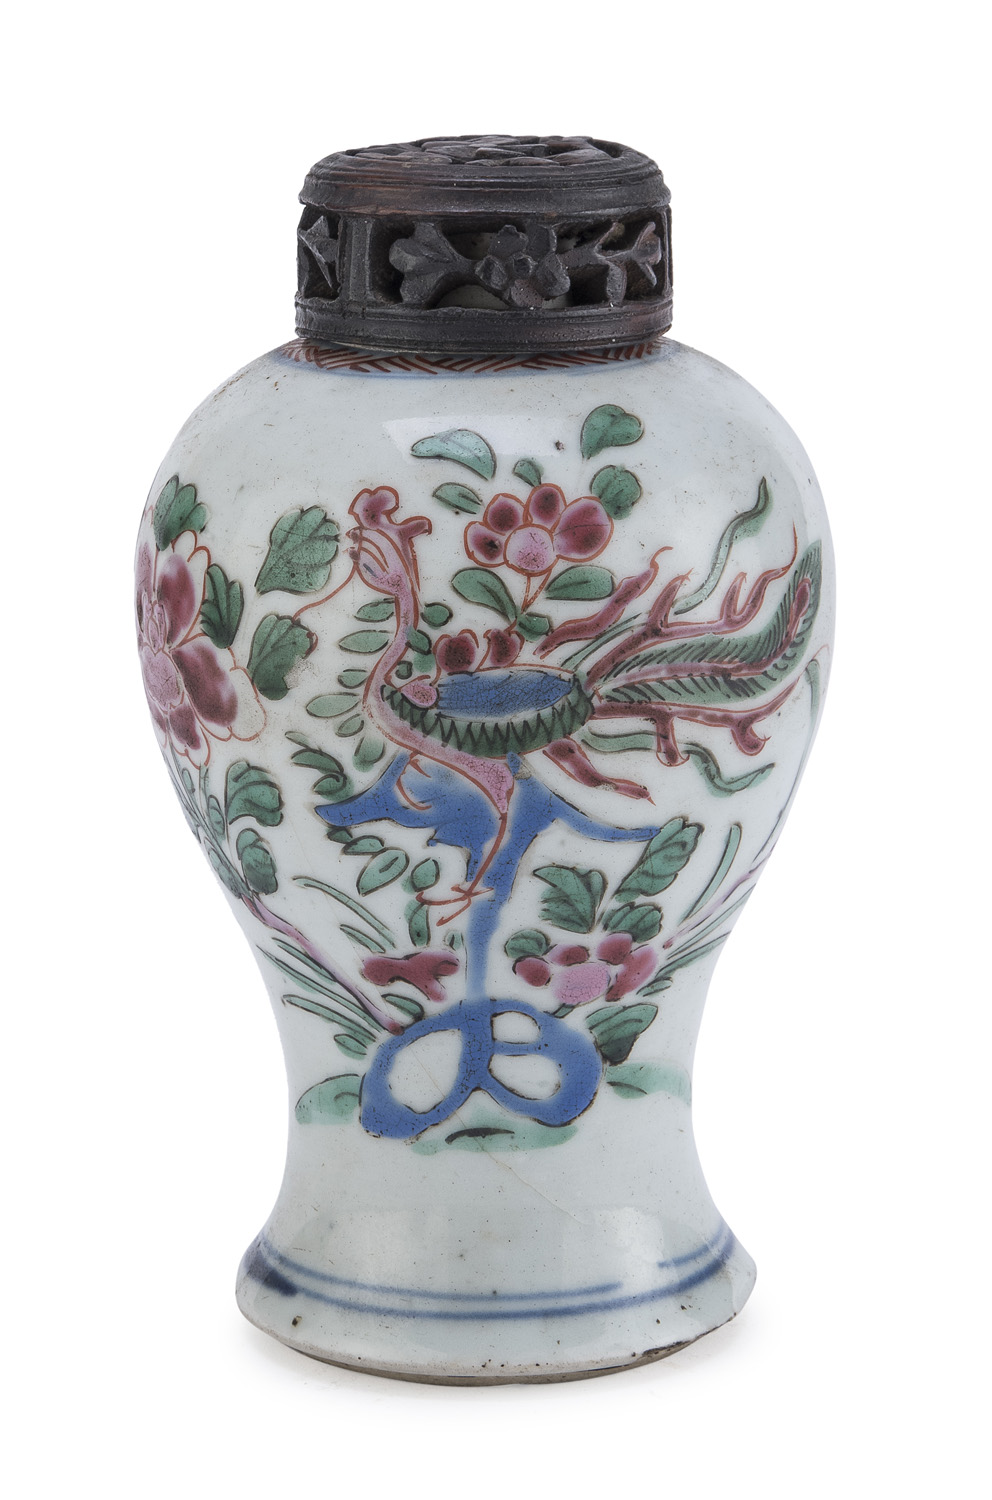 A CHINESE PORCELAIN CRICKET CAGE 19TH CENTURY.